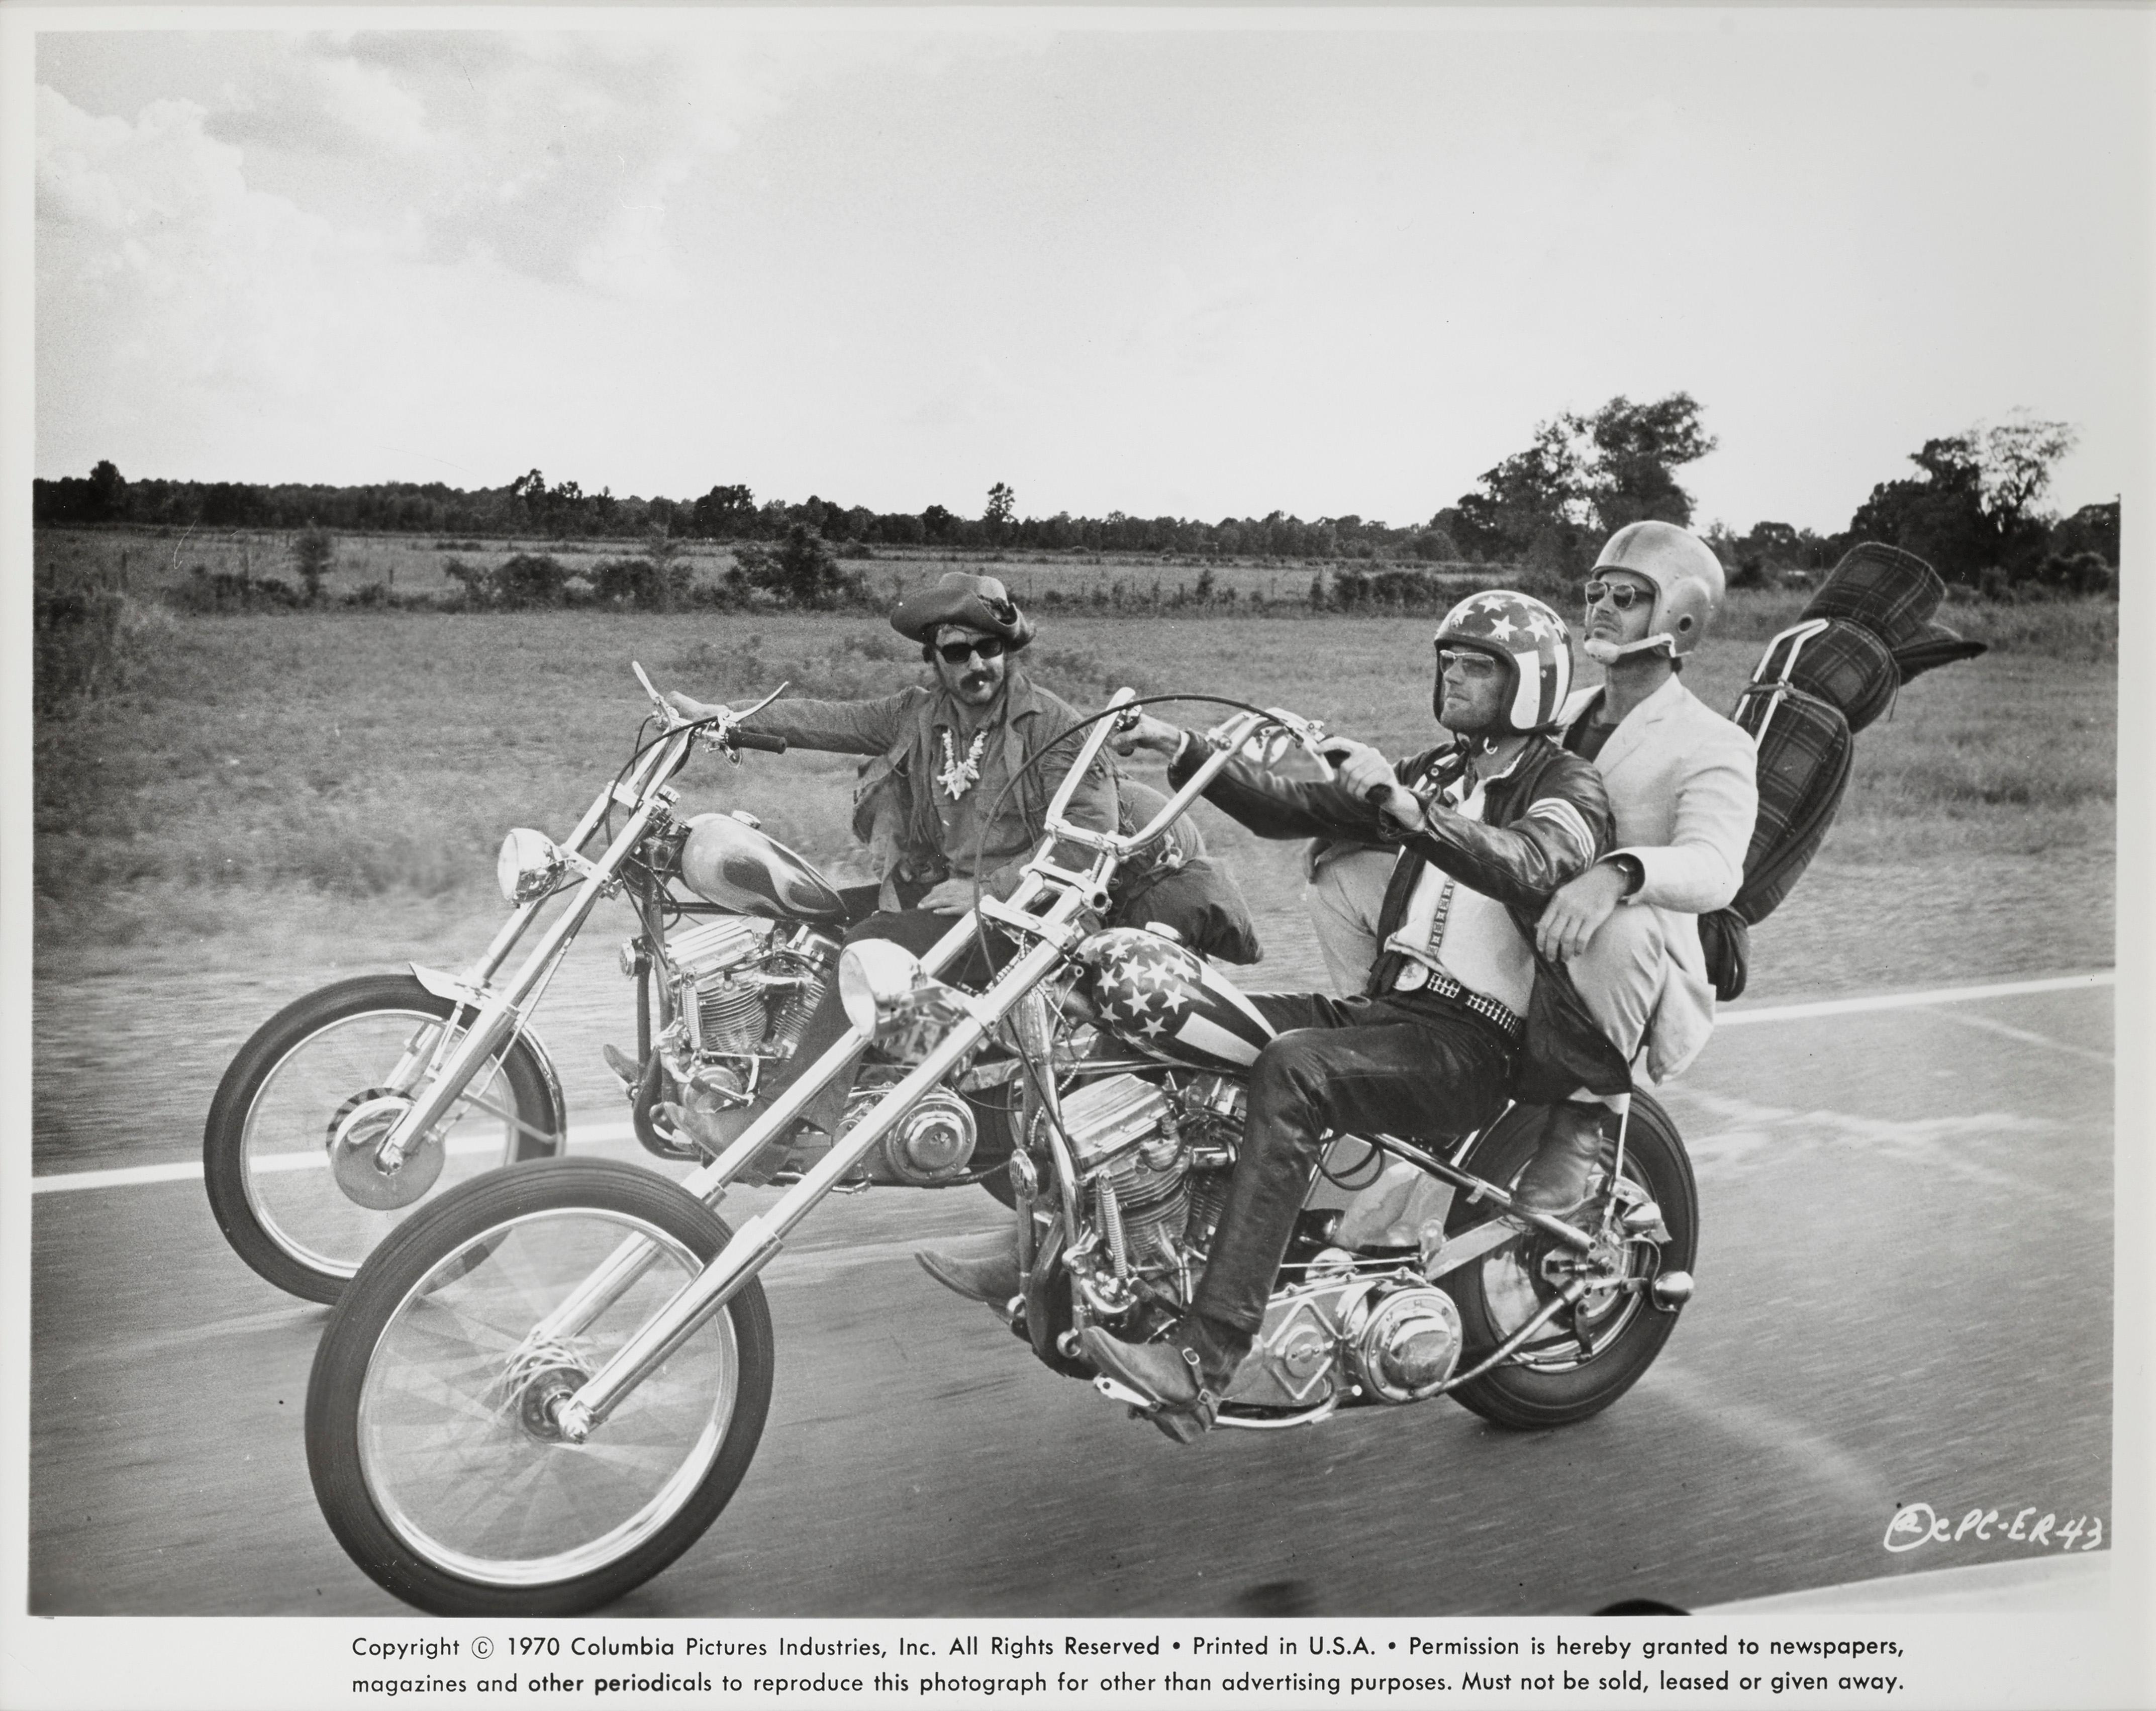 Original US framed production still for Easy Rider, 1969.
This American road movie was written by Peter Fonda, Dennis Hopper and Terry Southern. It was produced by Fonda and directed by Hopper. This is a landmark film that captured the national